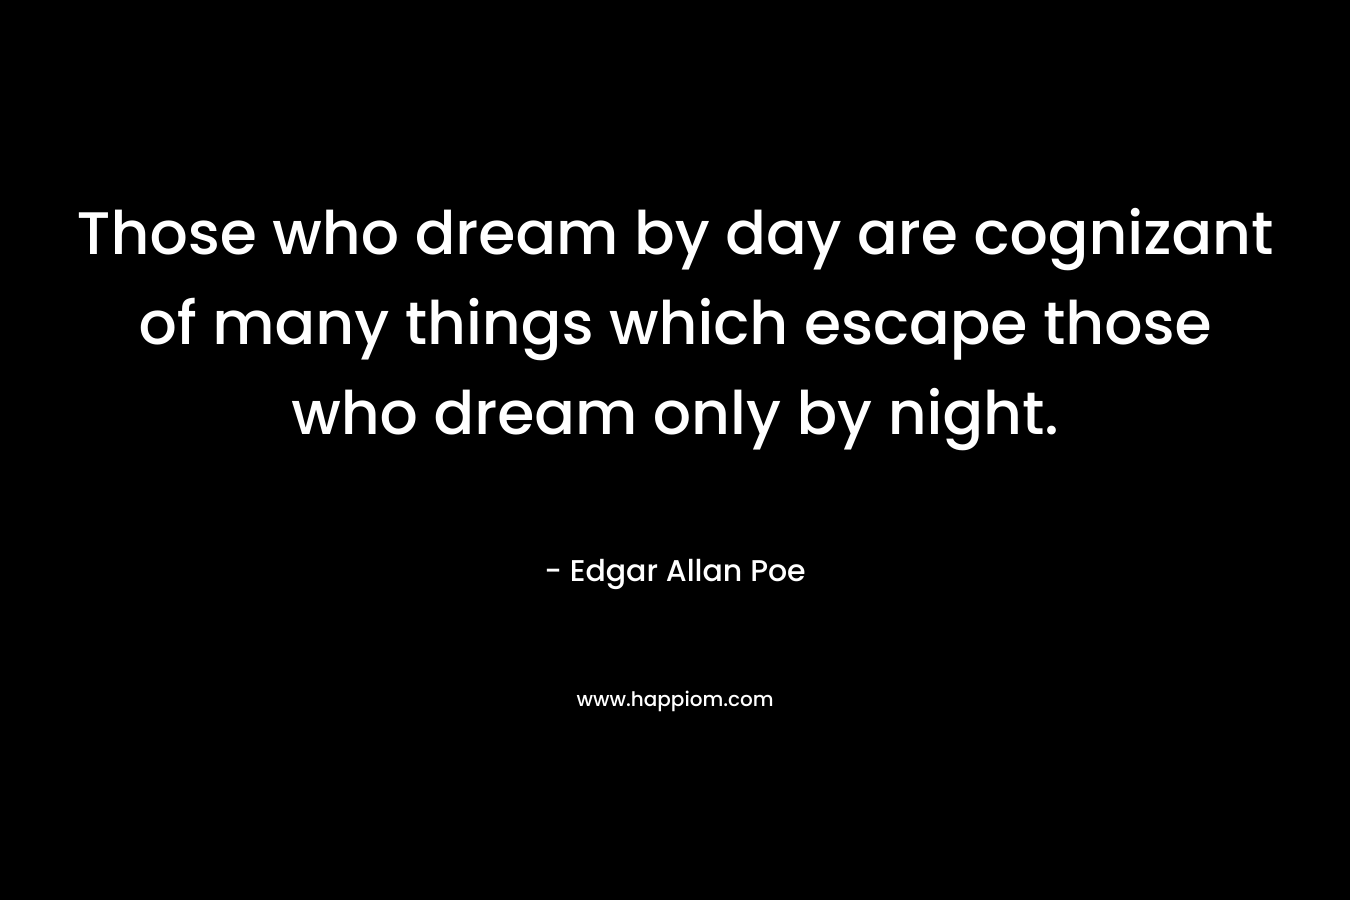 Those who dream by day are cognizant of many things which escape those who dream only by night. – Edgar Allan Poe